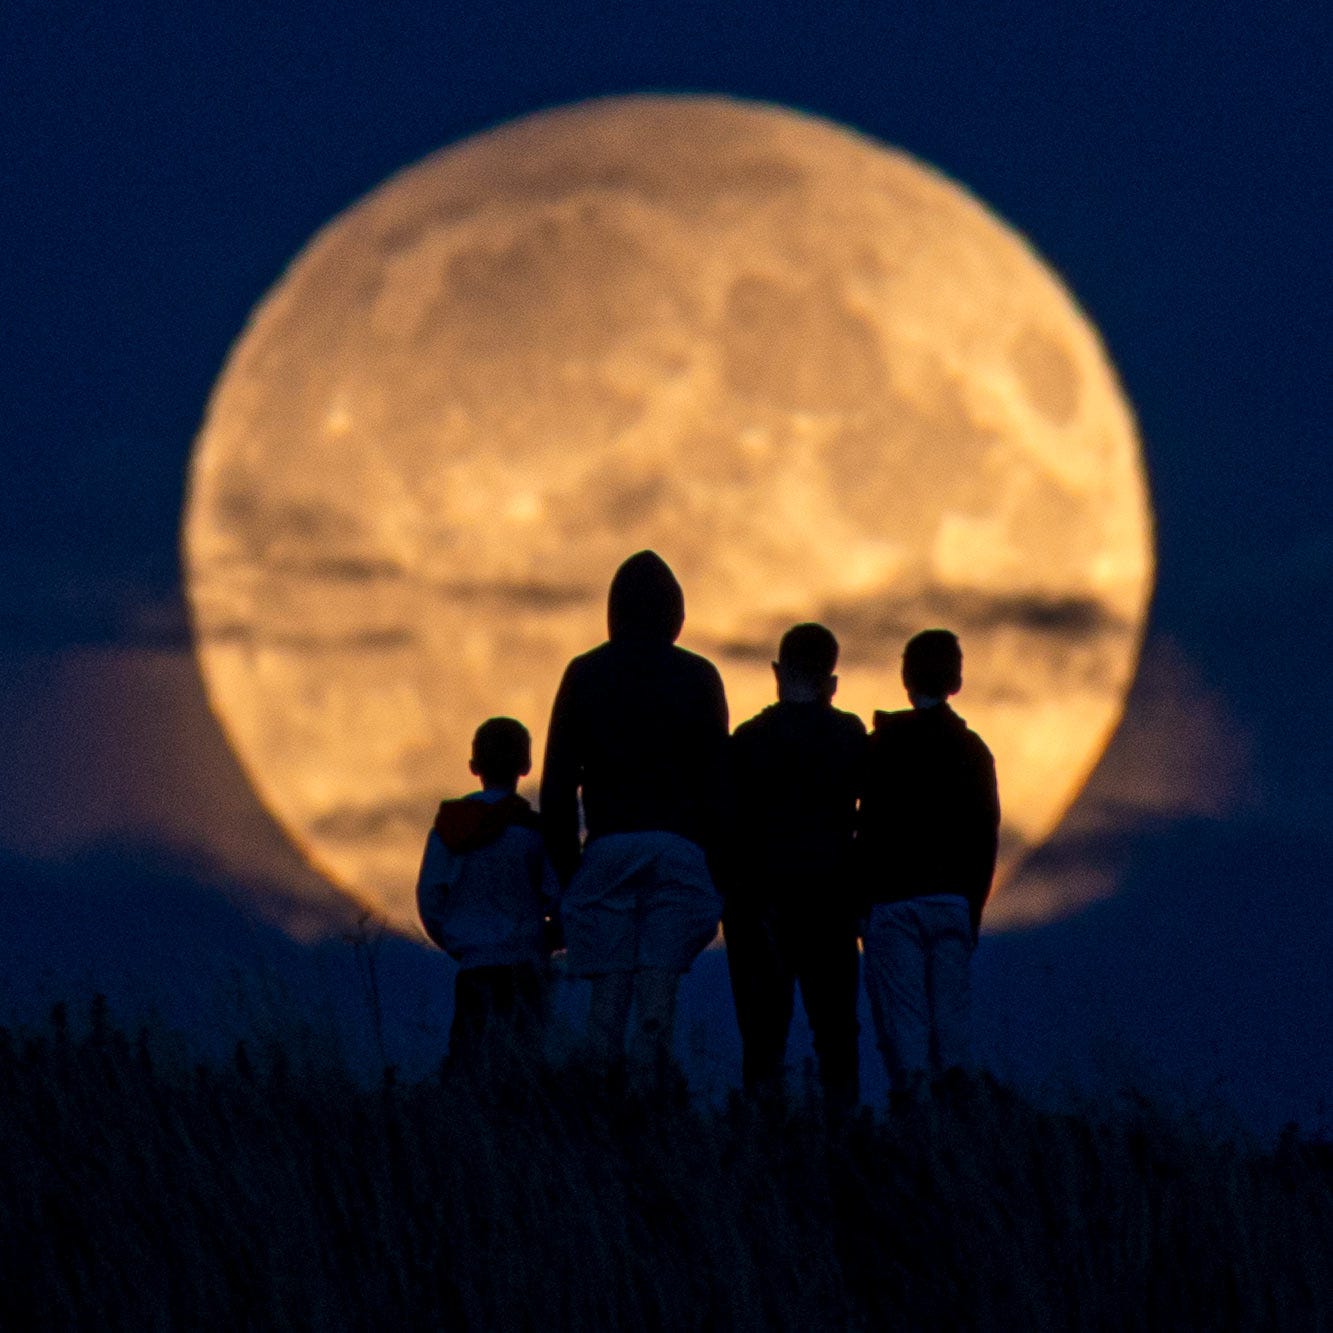 A huge moon in the distance with 4 people silhouetted in front of it staring at it